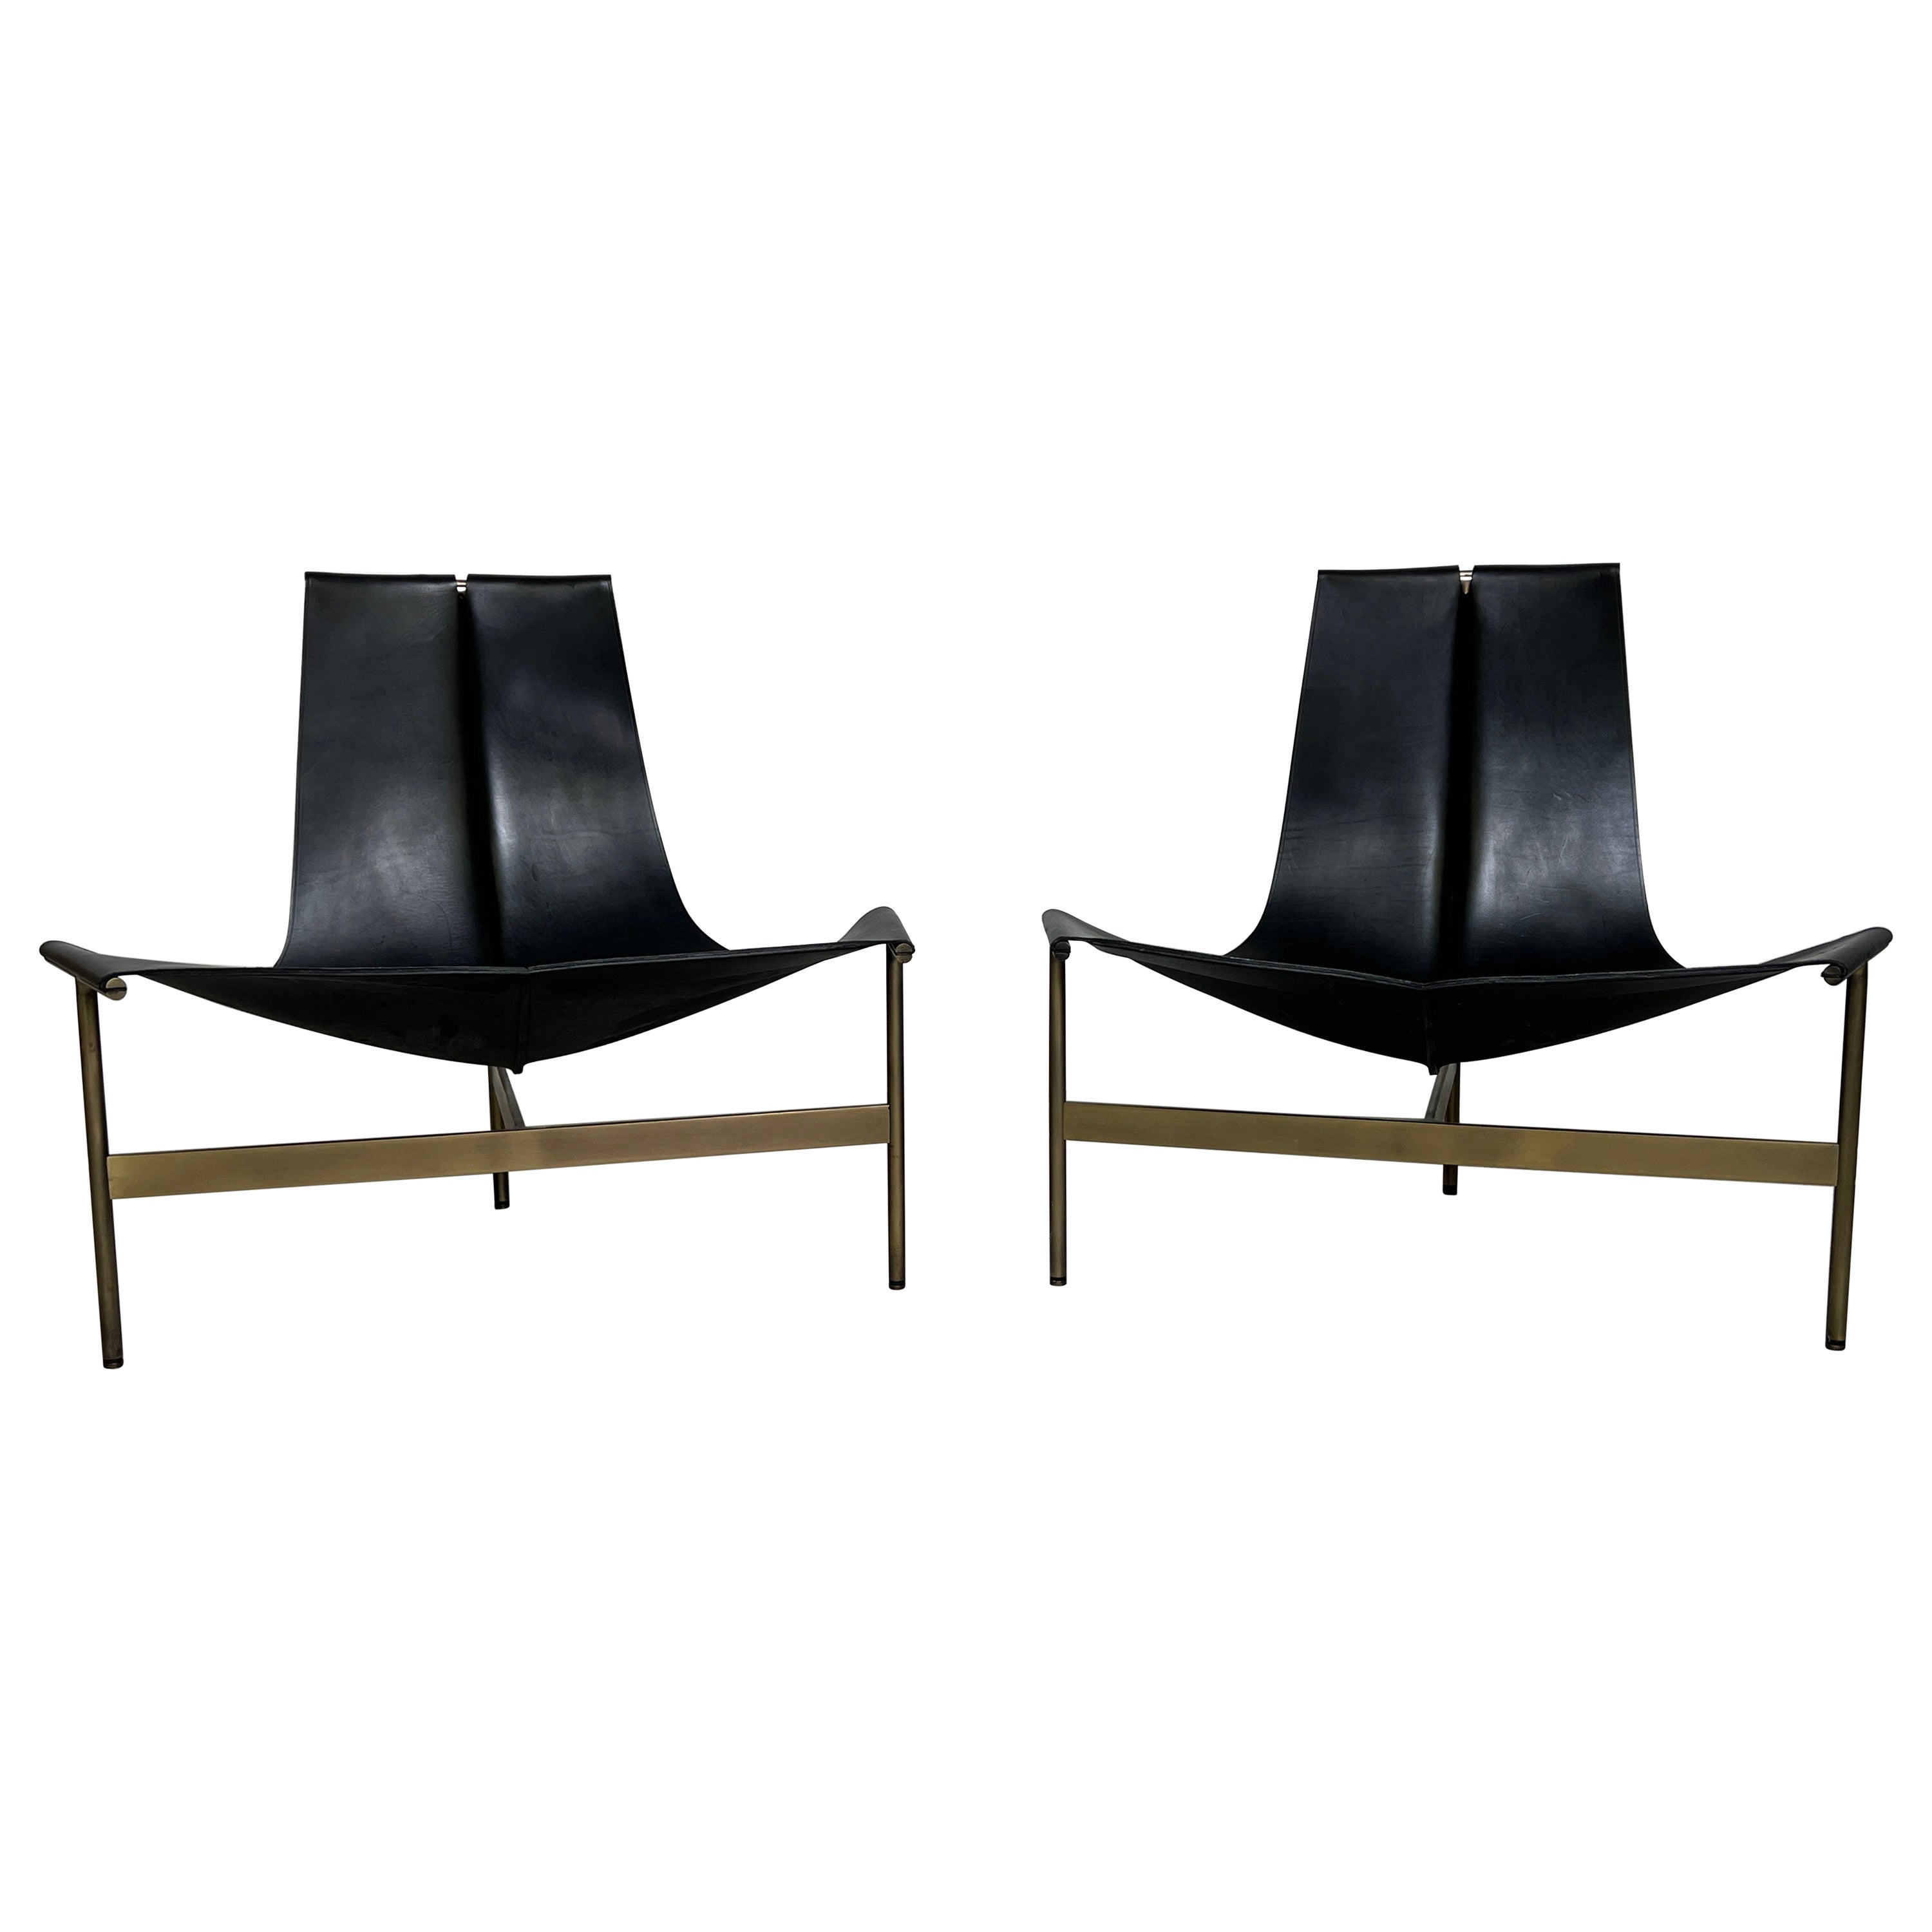 Pair of Bronze TG-15 Lounge Chair by Katavolos, Littell, & Kelley For Sale